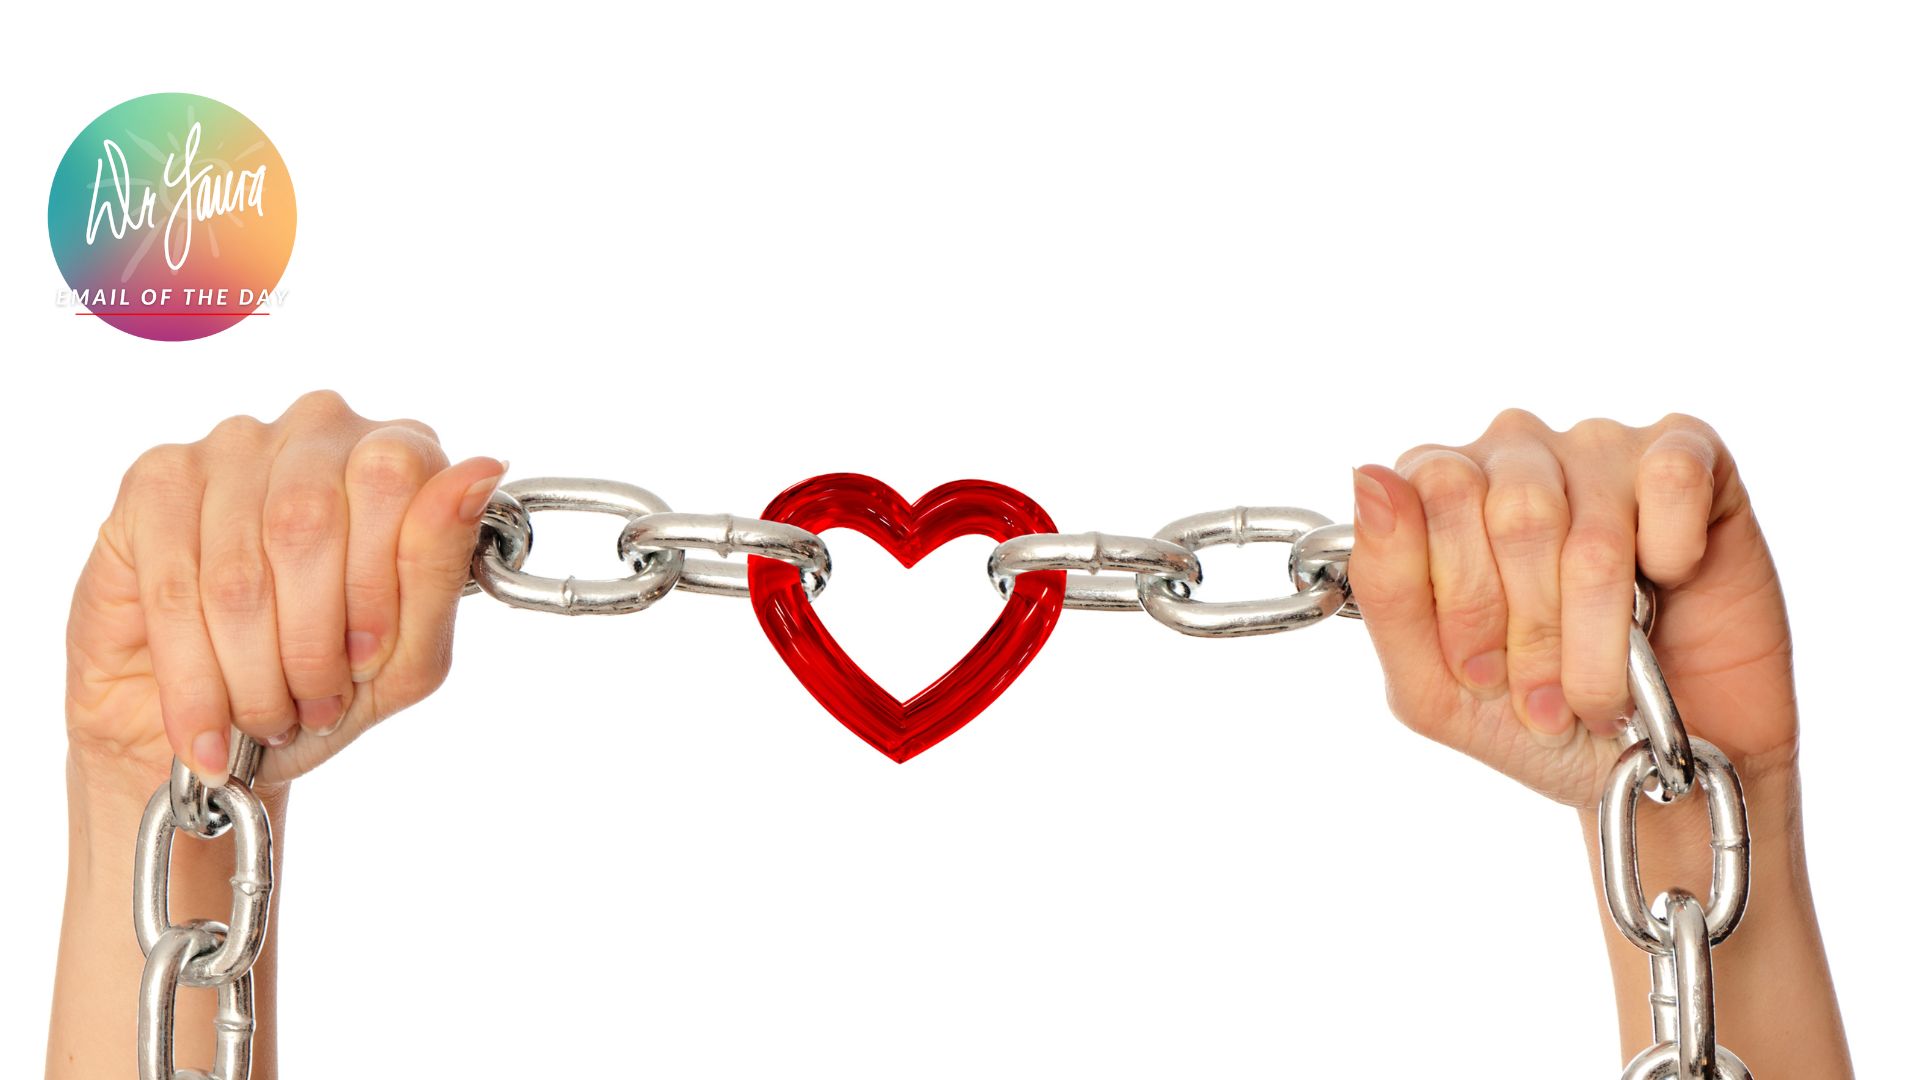 A pair of hands tugs at a chain with a heart as the middle link